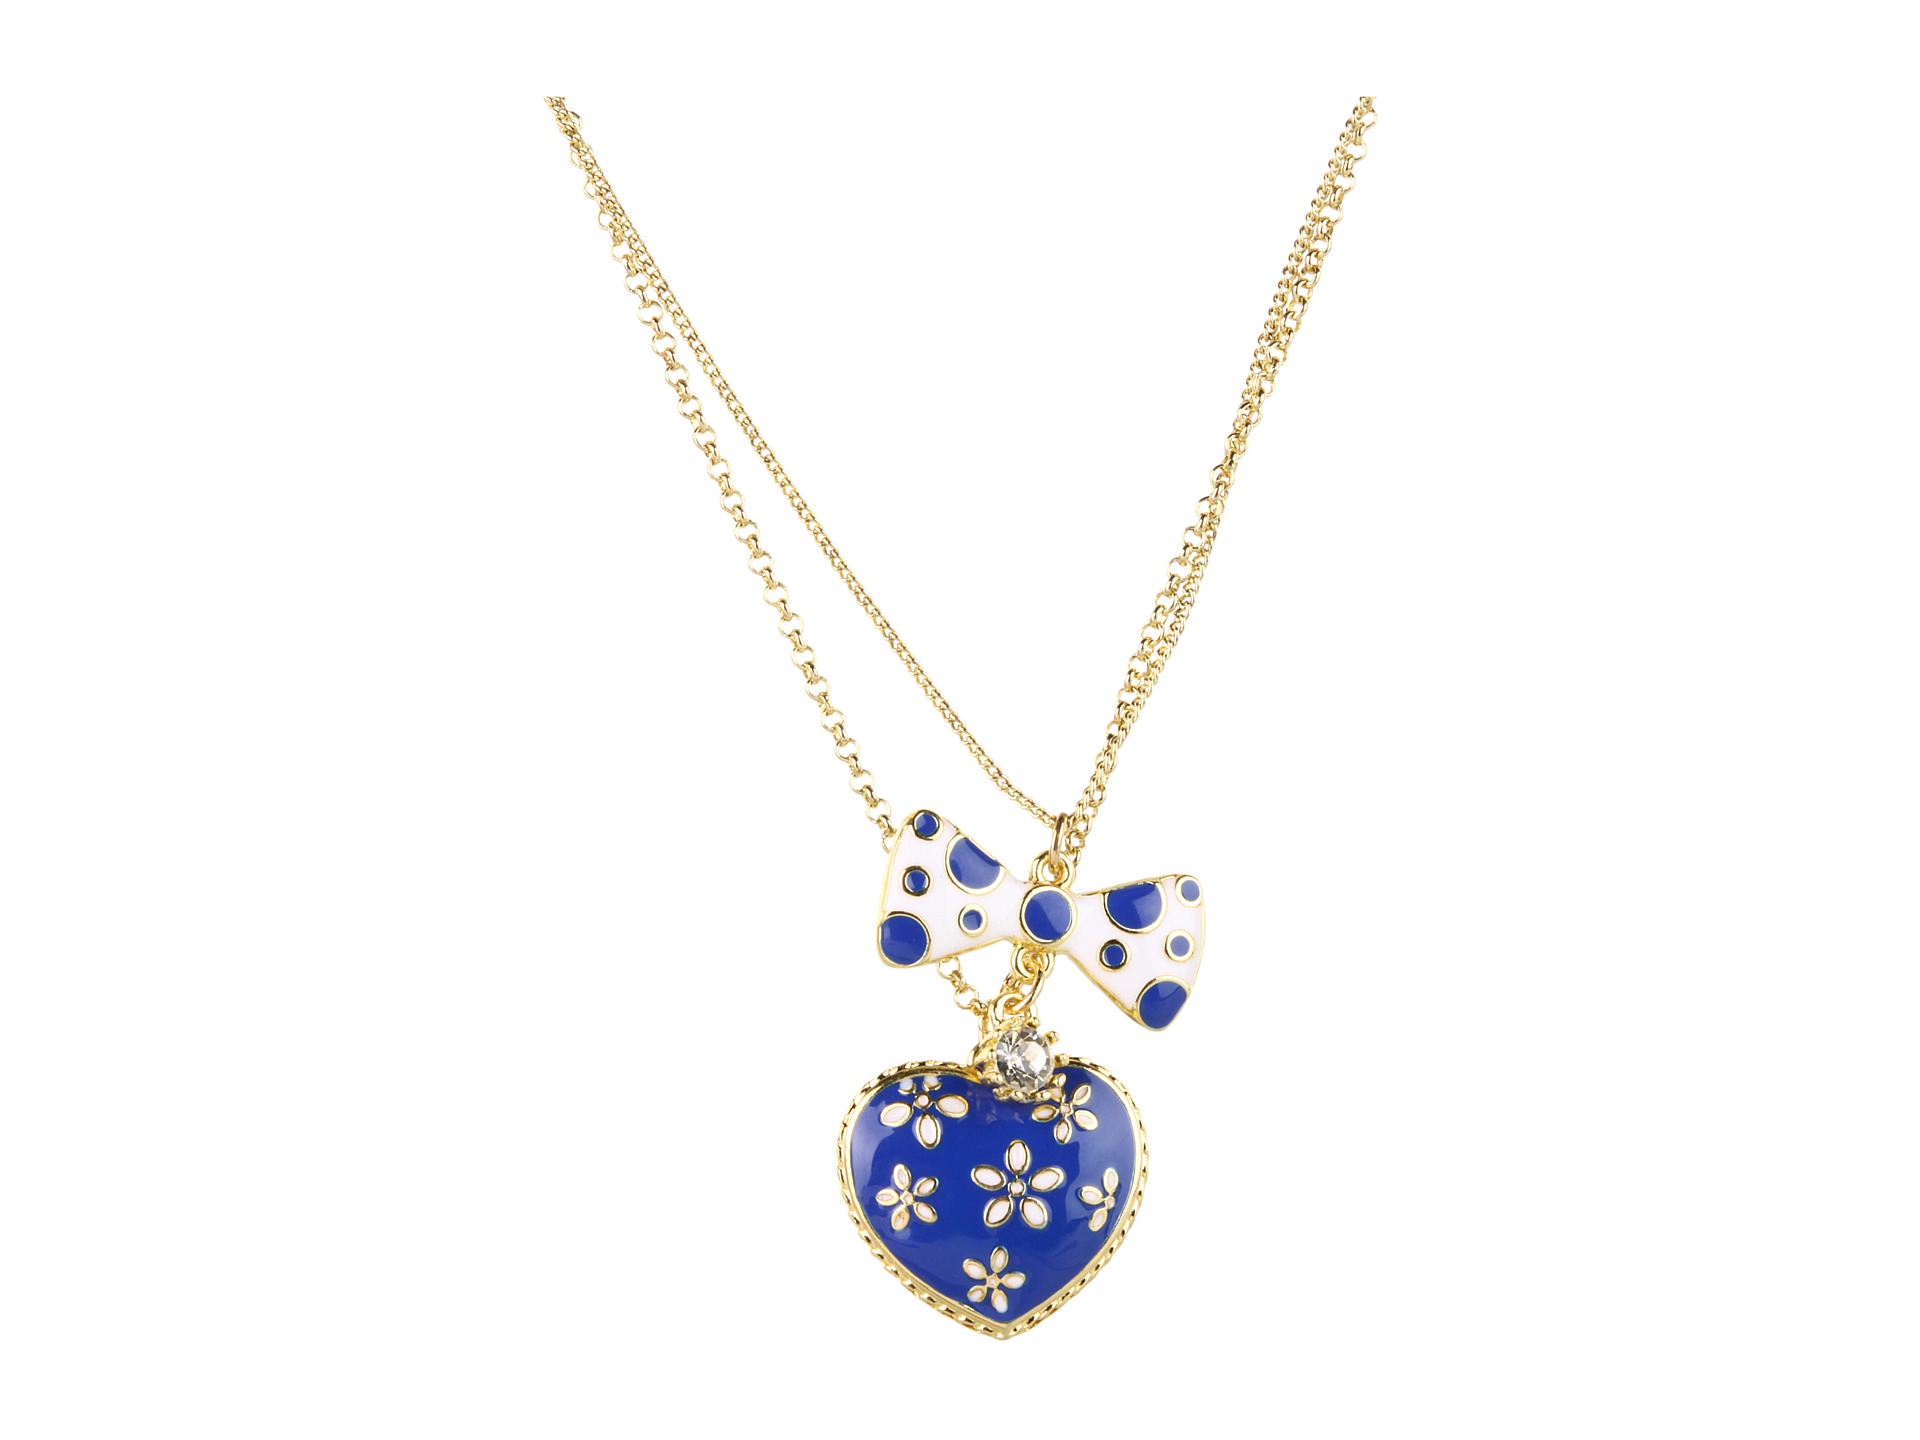 Betsey Johnson Pretty Polka Dot Flow Bow Necklace $40.00 NEW Betsey 